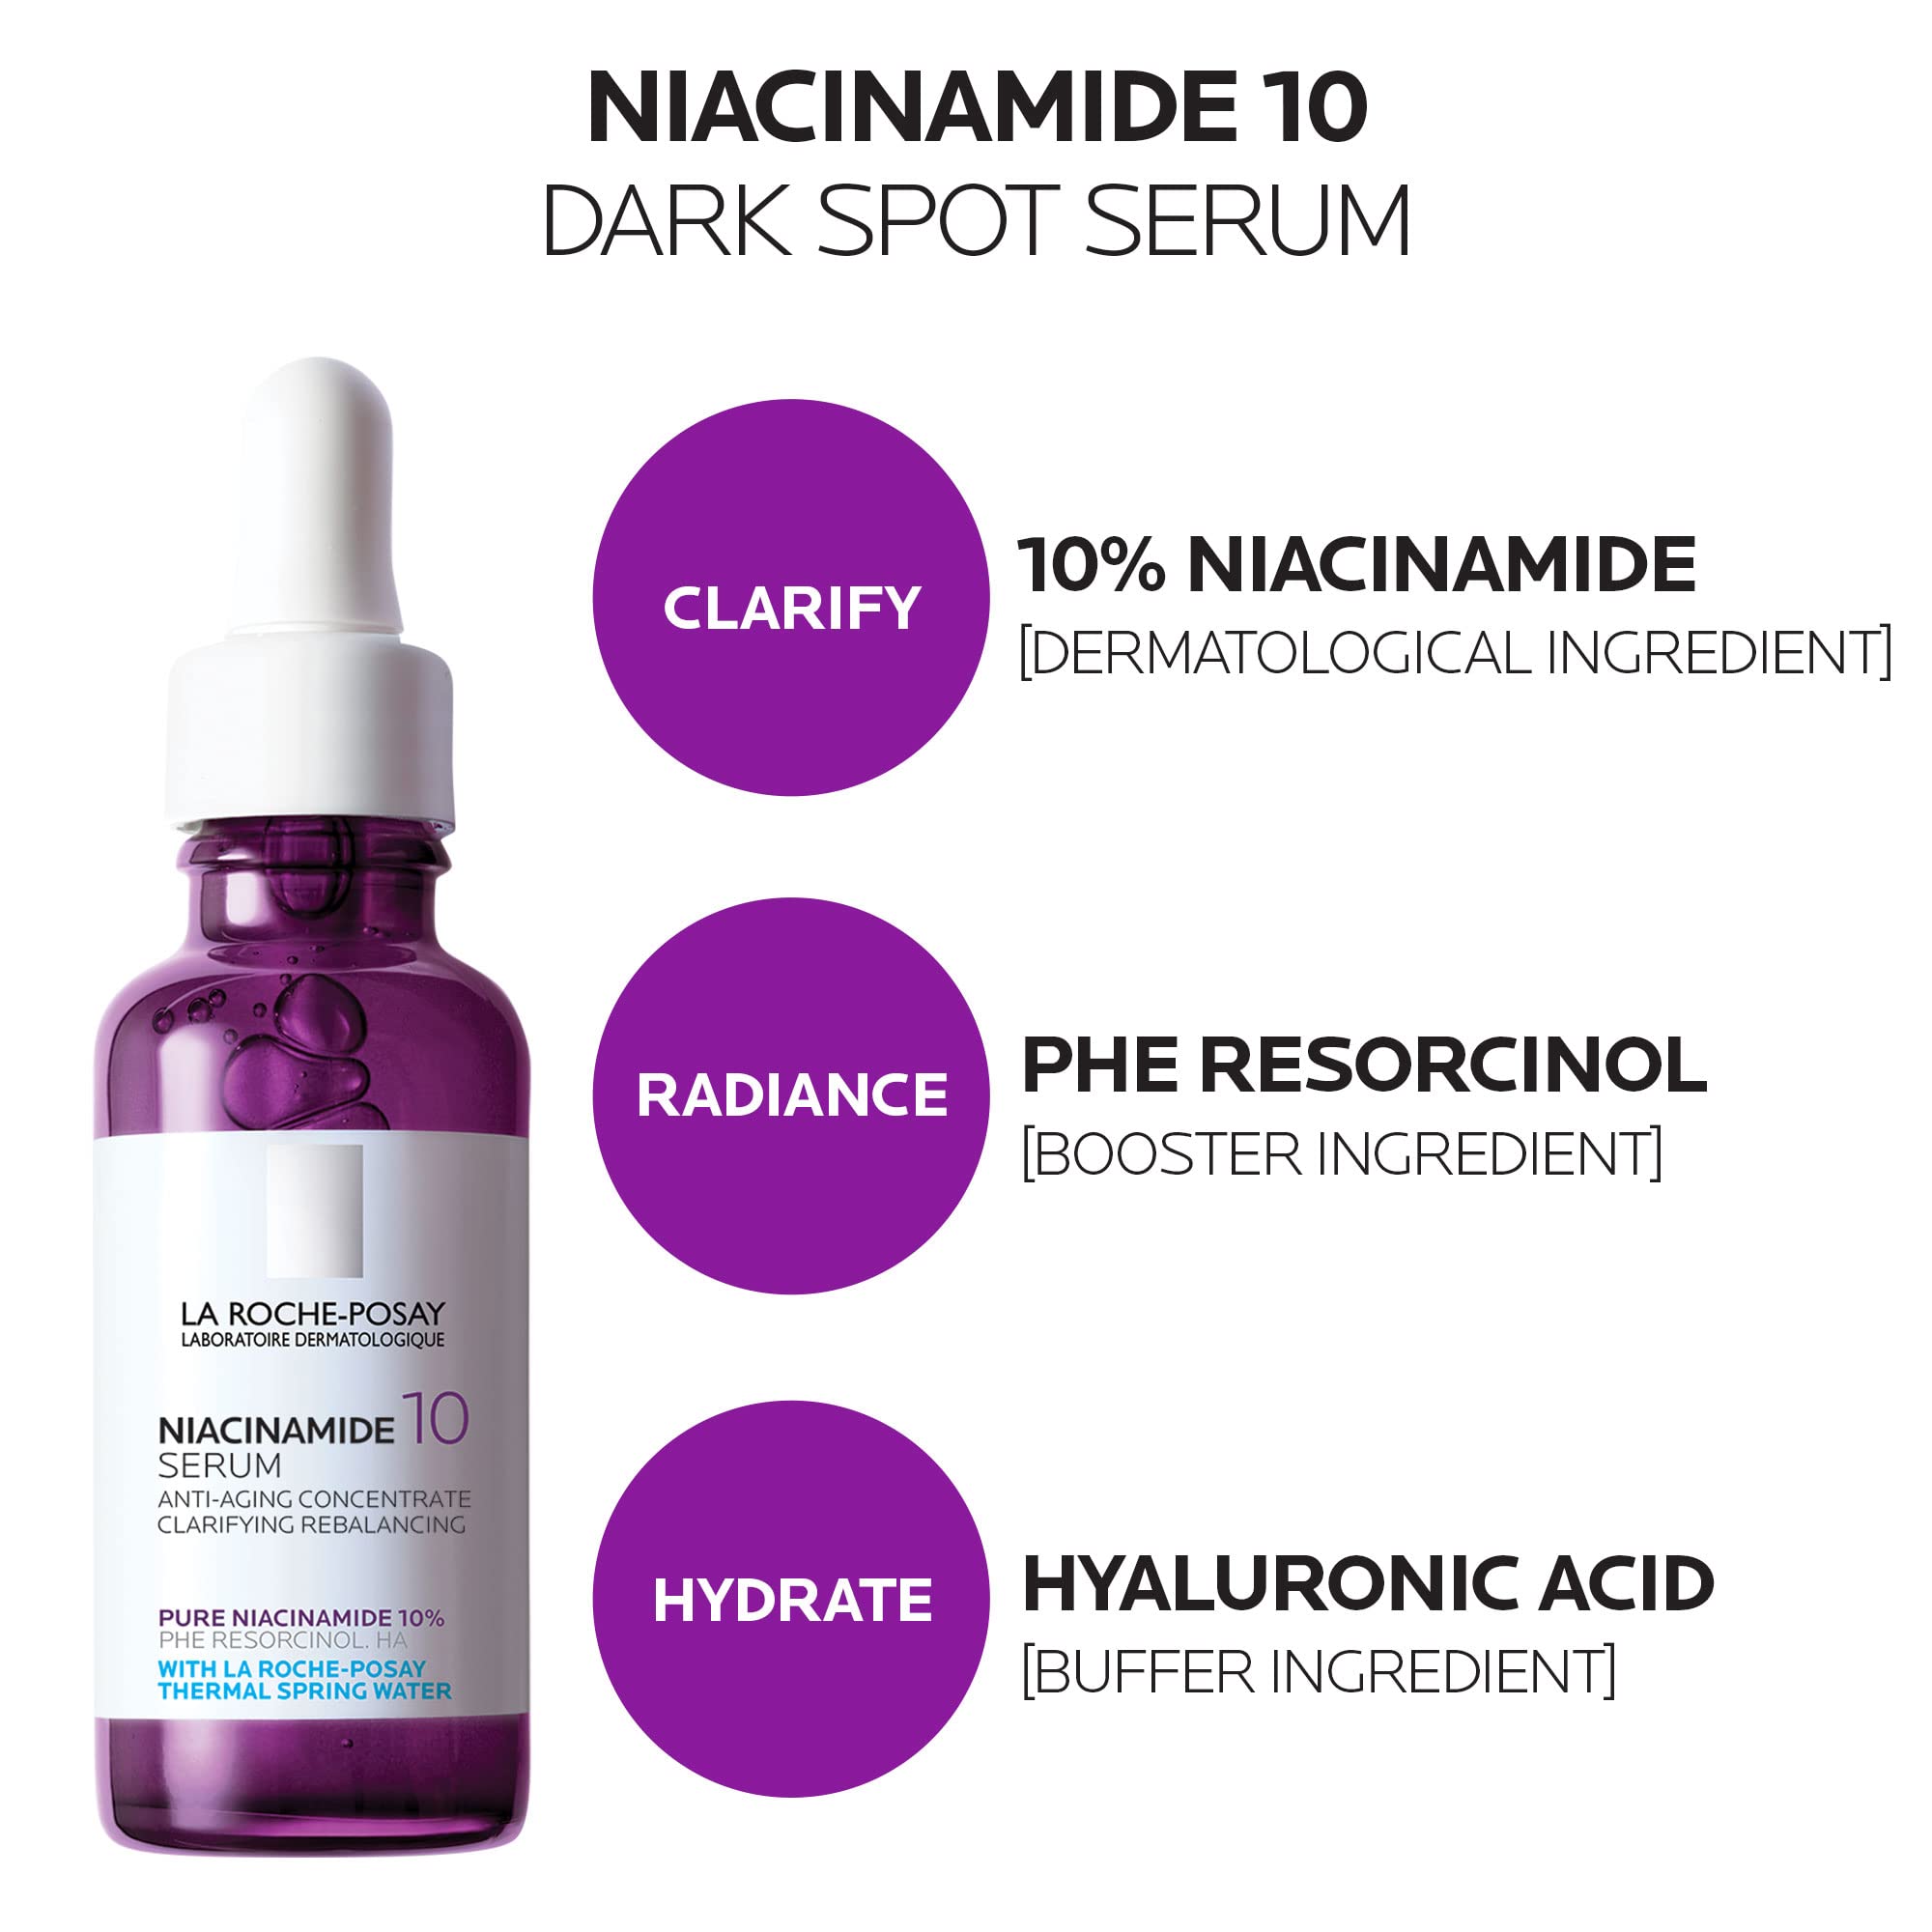 La Roche-Posay Niacinamide 10 Face Serum, Brightening and Anti-Aging Facial Serum with 10% Niacinamide,